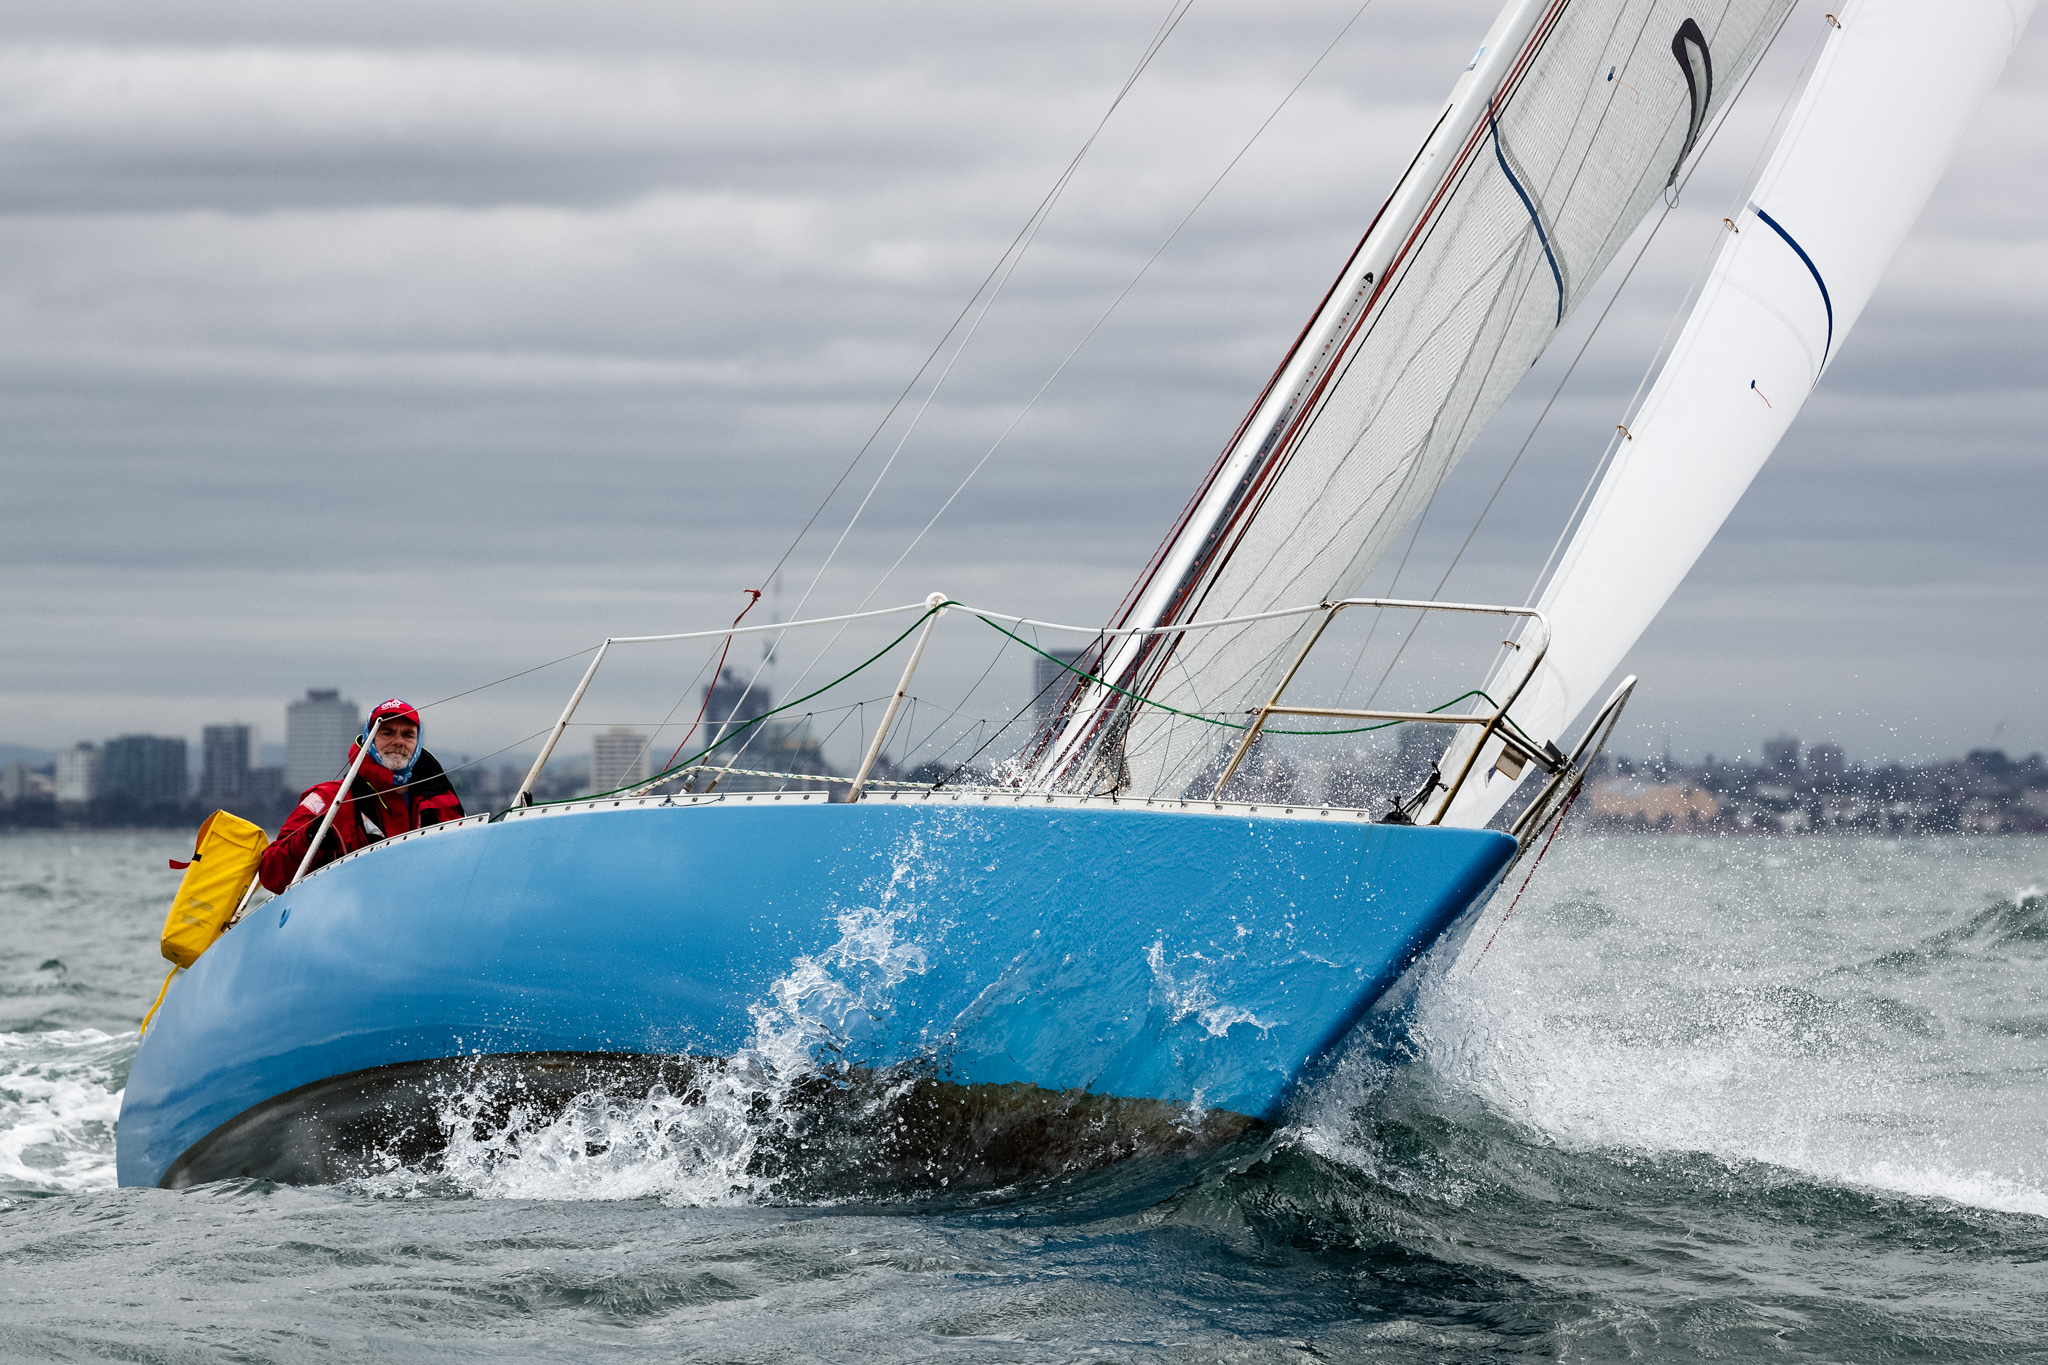 Large fixed keel yachts are seen racing during the 2023 Ocean Racing Club of Victoria Winter Series Race 4 to Geelong. Credit: Dave Hewison